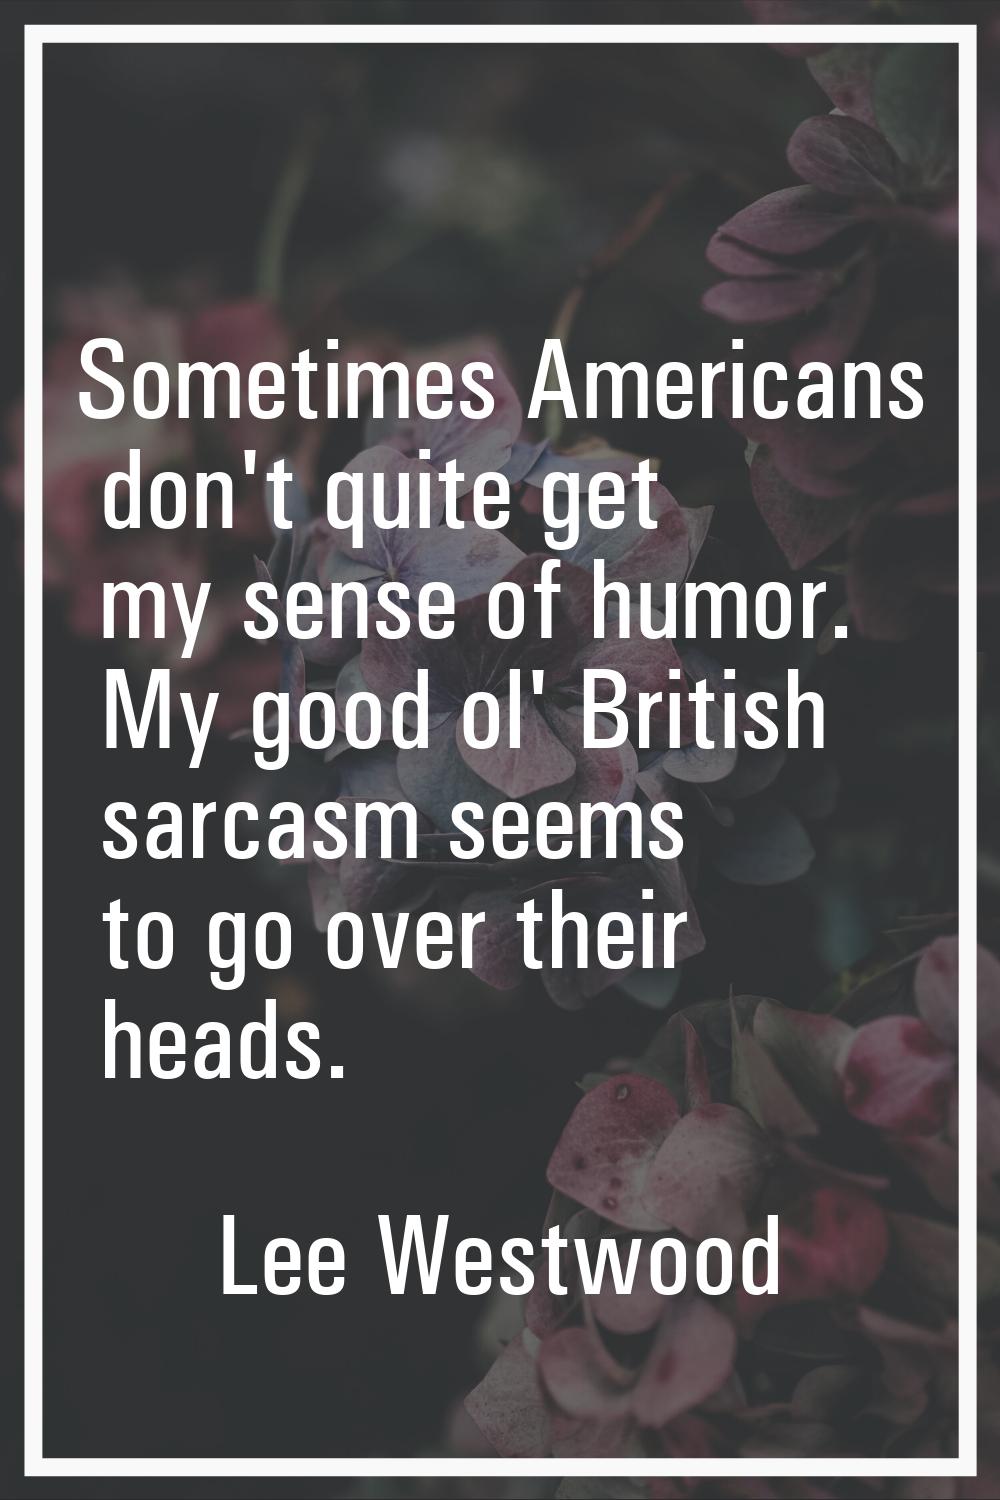 Sometimes Americans don't quite get my sense of humor. My good ol' British sarcasm seems to go over